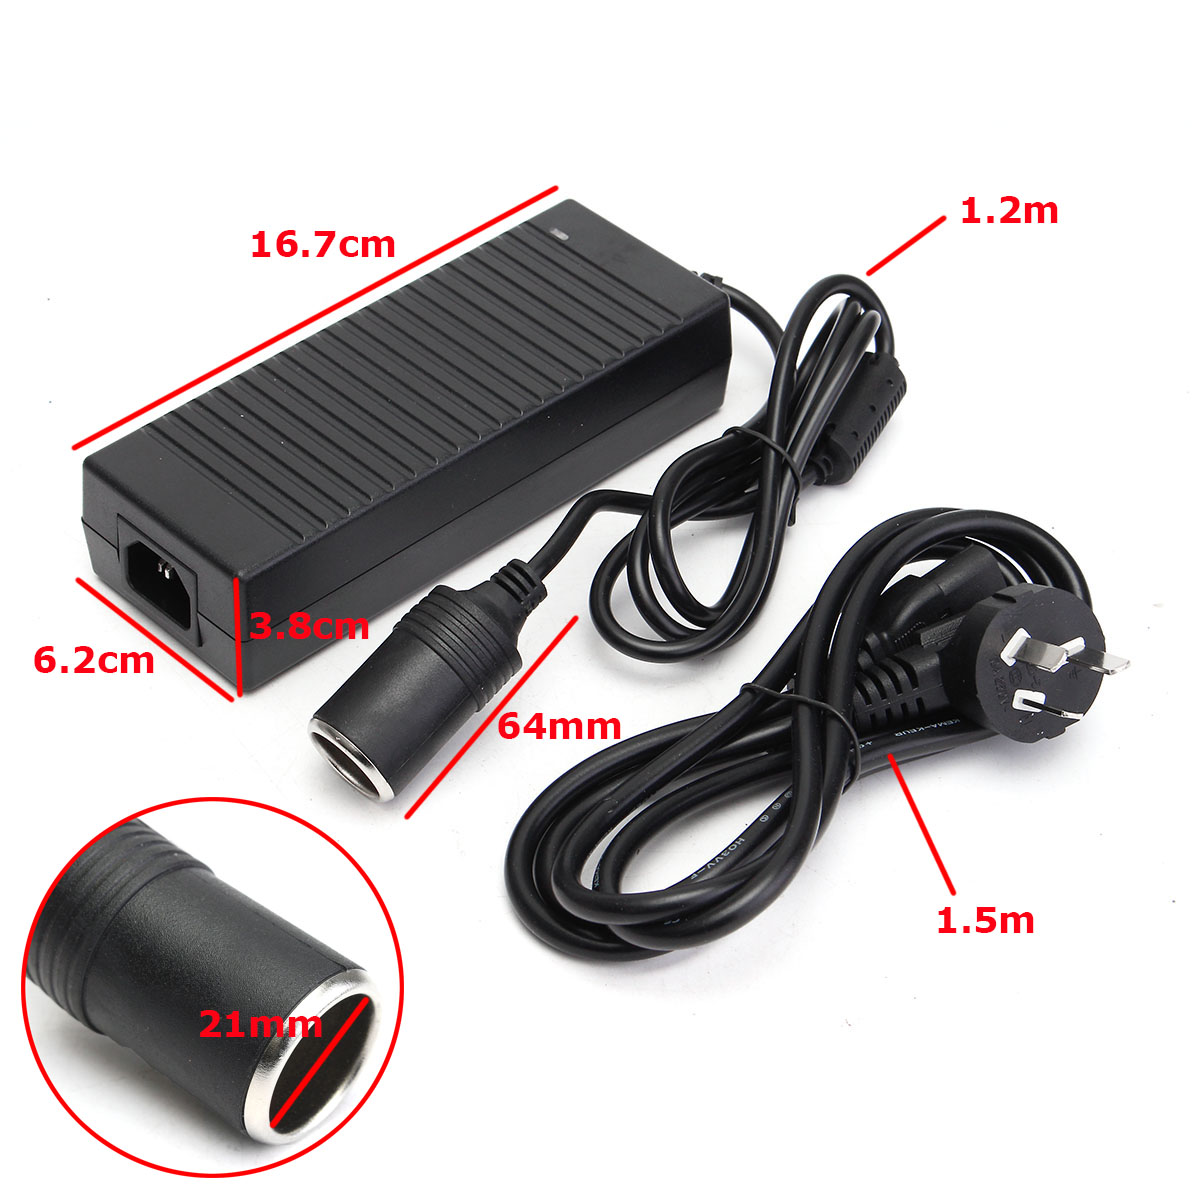 120W-10A-AC-220V-To-DC-12V-Car-Charger-Cigarette-Lighter-Inverter-Power-Adapter-Coventer-Charger-1130736